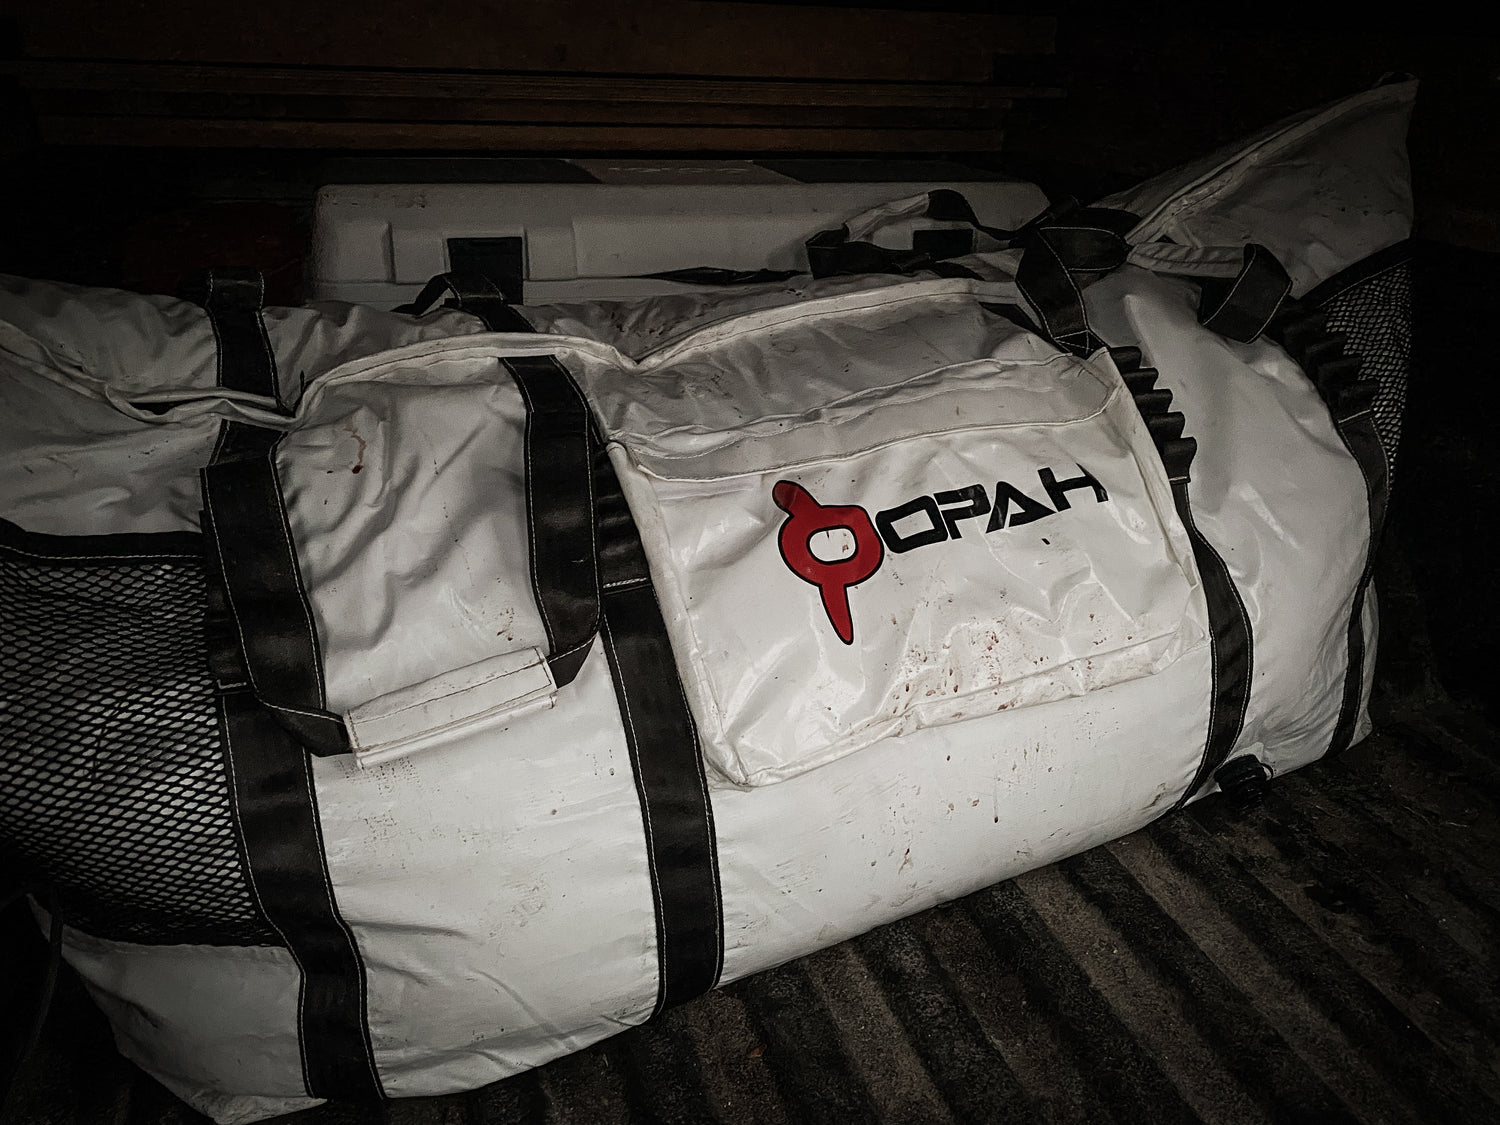 Opah Gear Fathom 6 Fish Cooler Bag Kill Bag. Protects your catch longer. The most reliable fish bag on the market. Purposely built to be the highest quality fish cooler bag in sportfishing. Even great when used as an insulated cooler bag while out camping or for other normal use. The highest quality insulated bag. A perfect Tuna Kill Bag, Dorado Kill bag, or yellowtail kill bag.